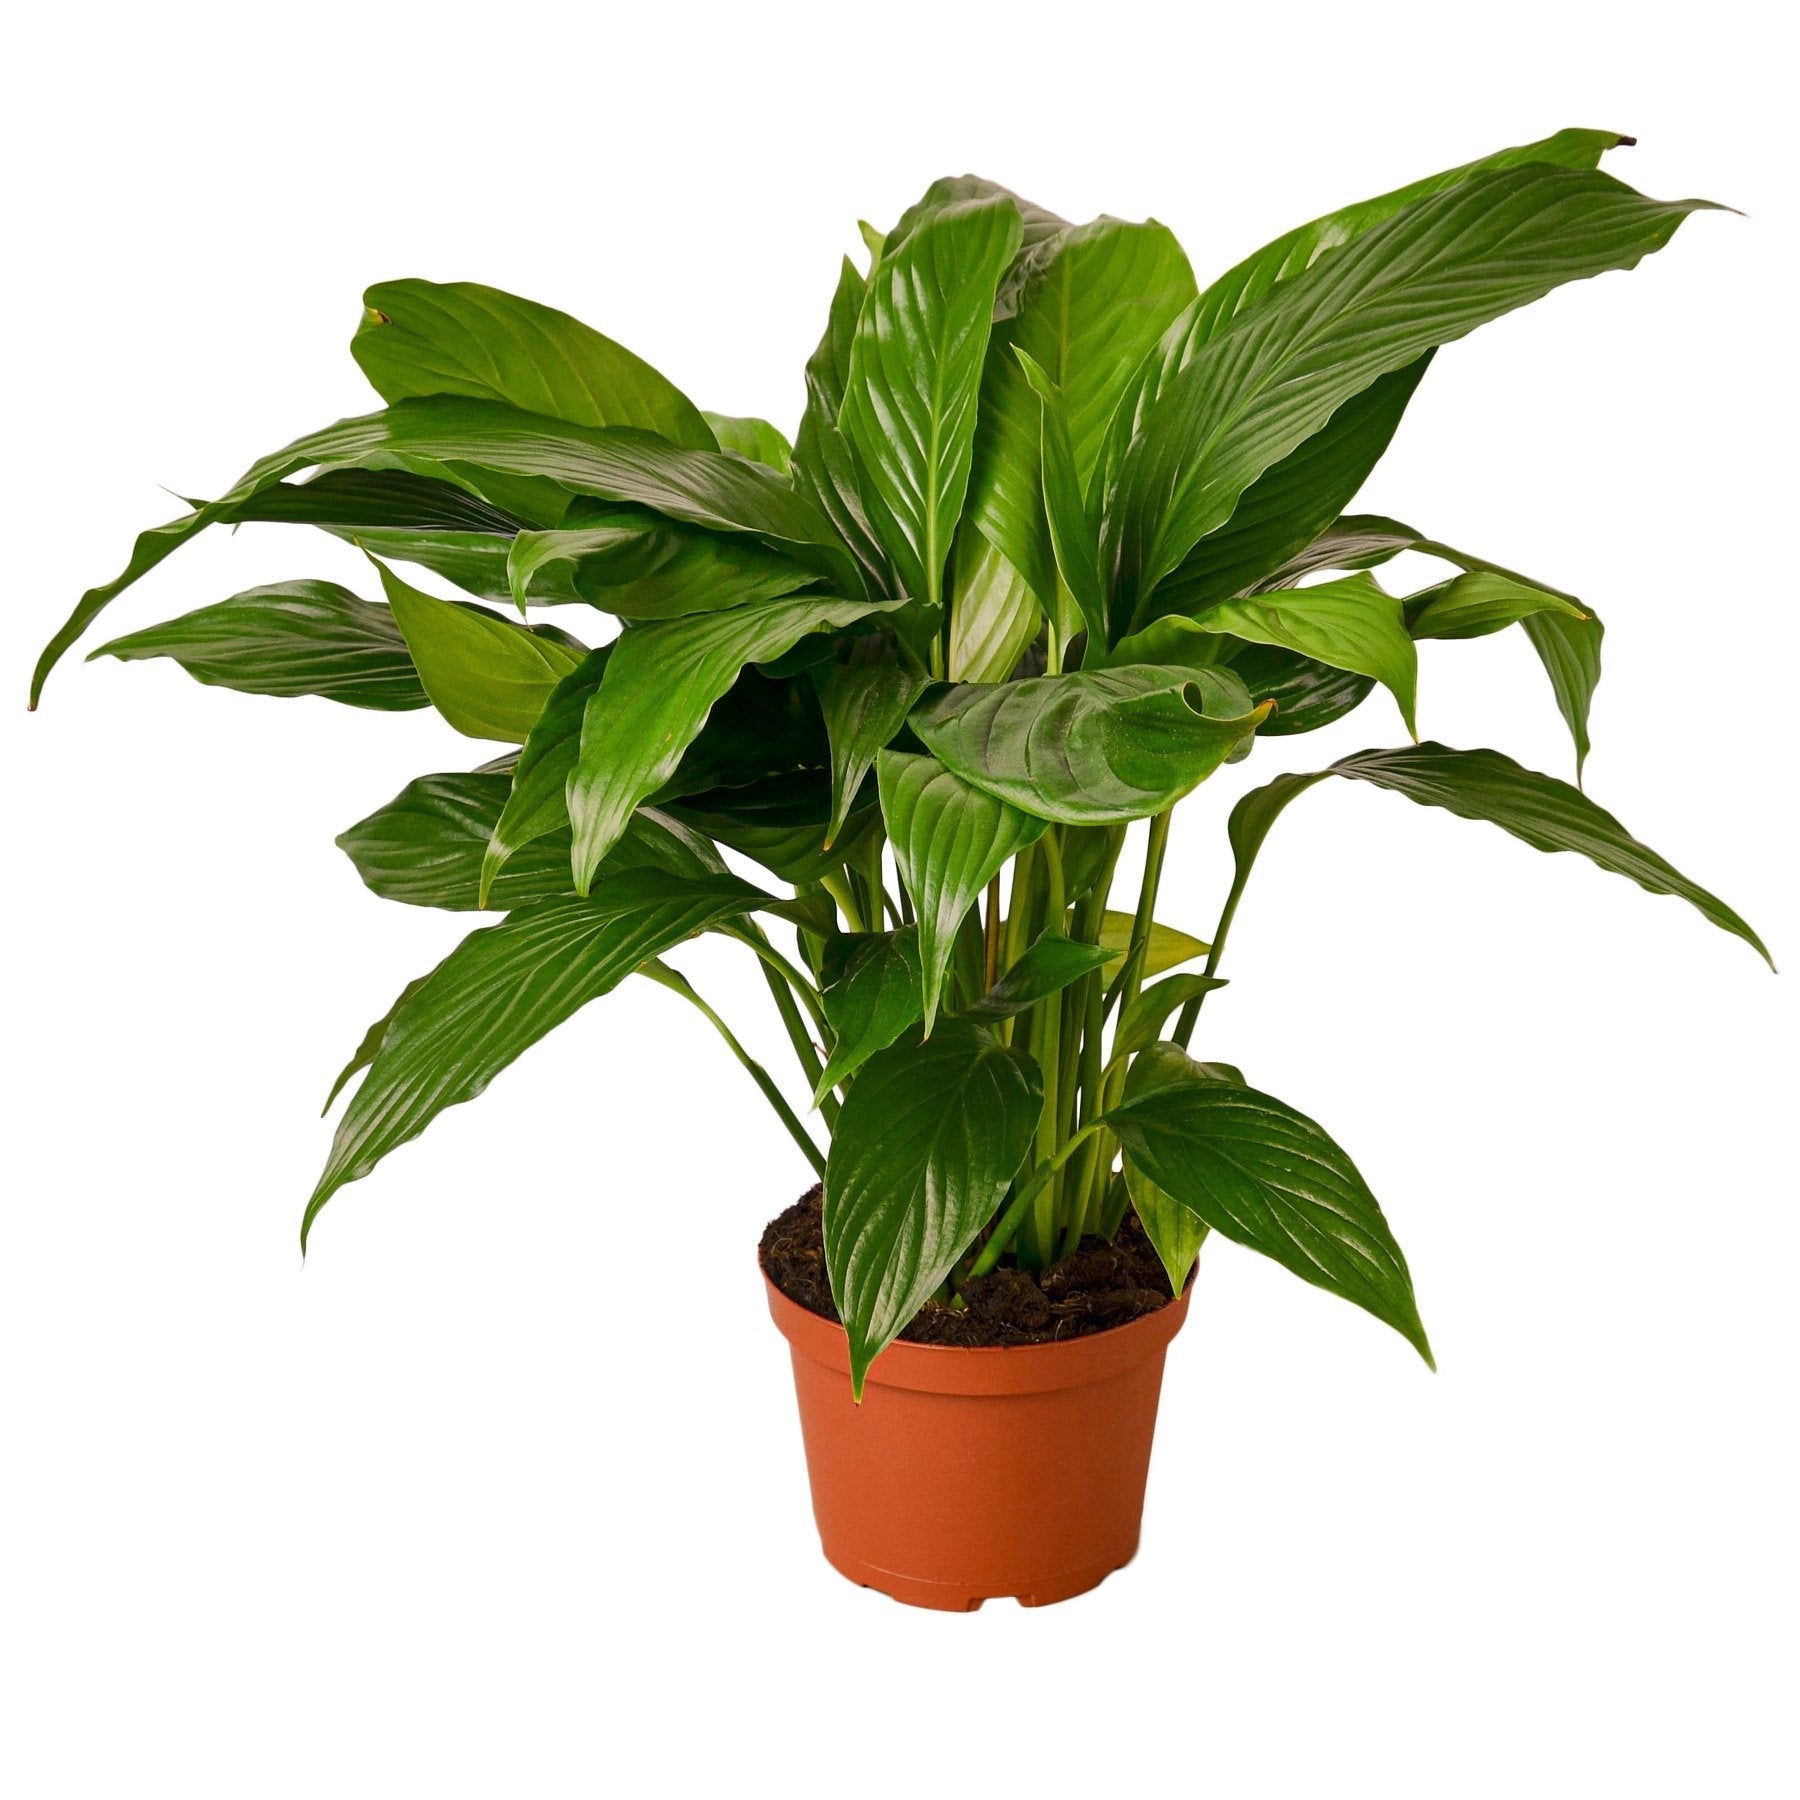 A potted plant with green leaves on a white background, available at a nearby nursery.